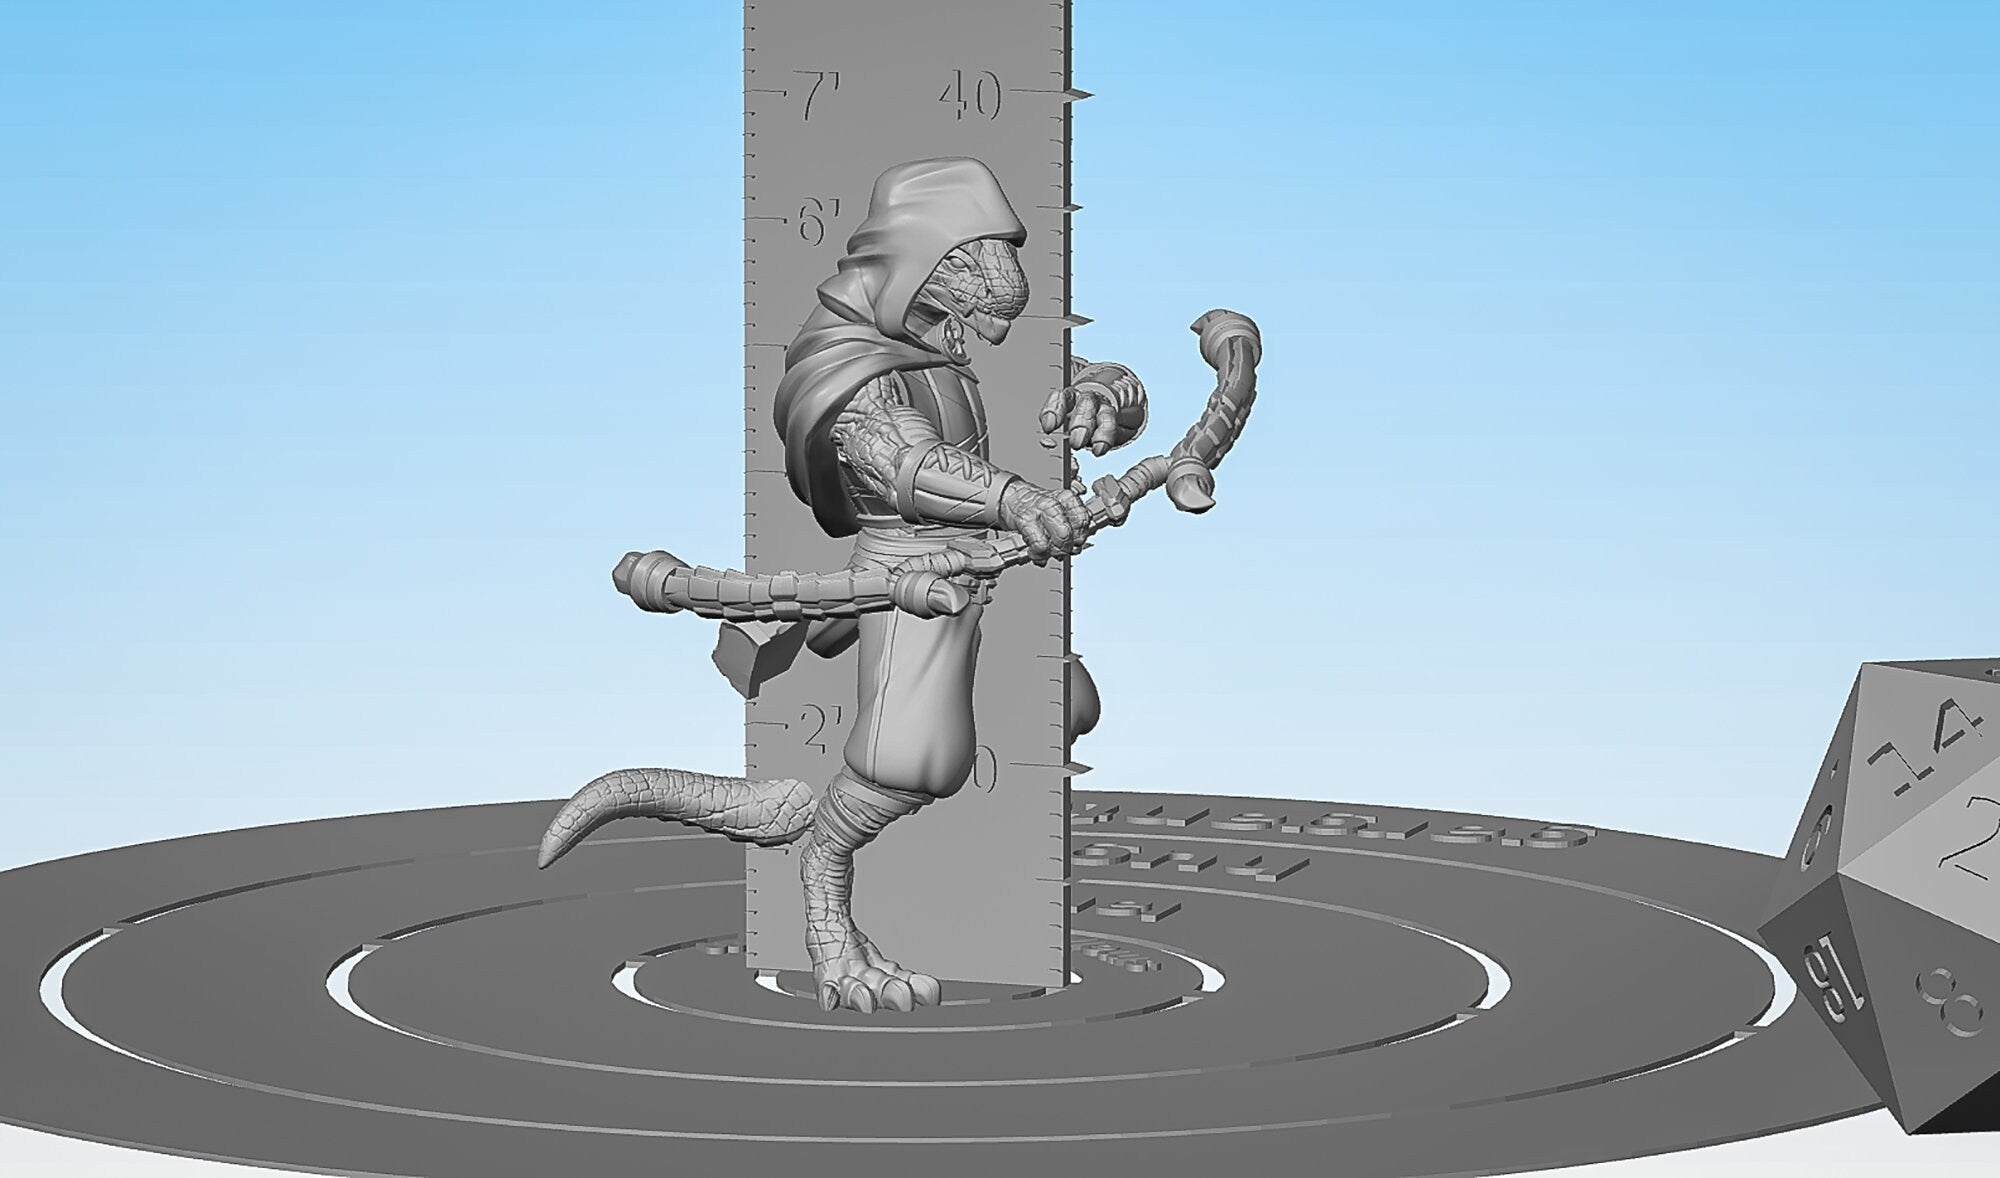 DRAGONBORN "Ranger Bow" | Dungeons and Dragons | DnD | Pathfinder | Tabletop | RPG | Hero Size | 28 mm-Role Playing Miniatures